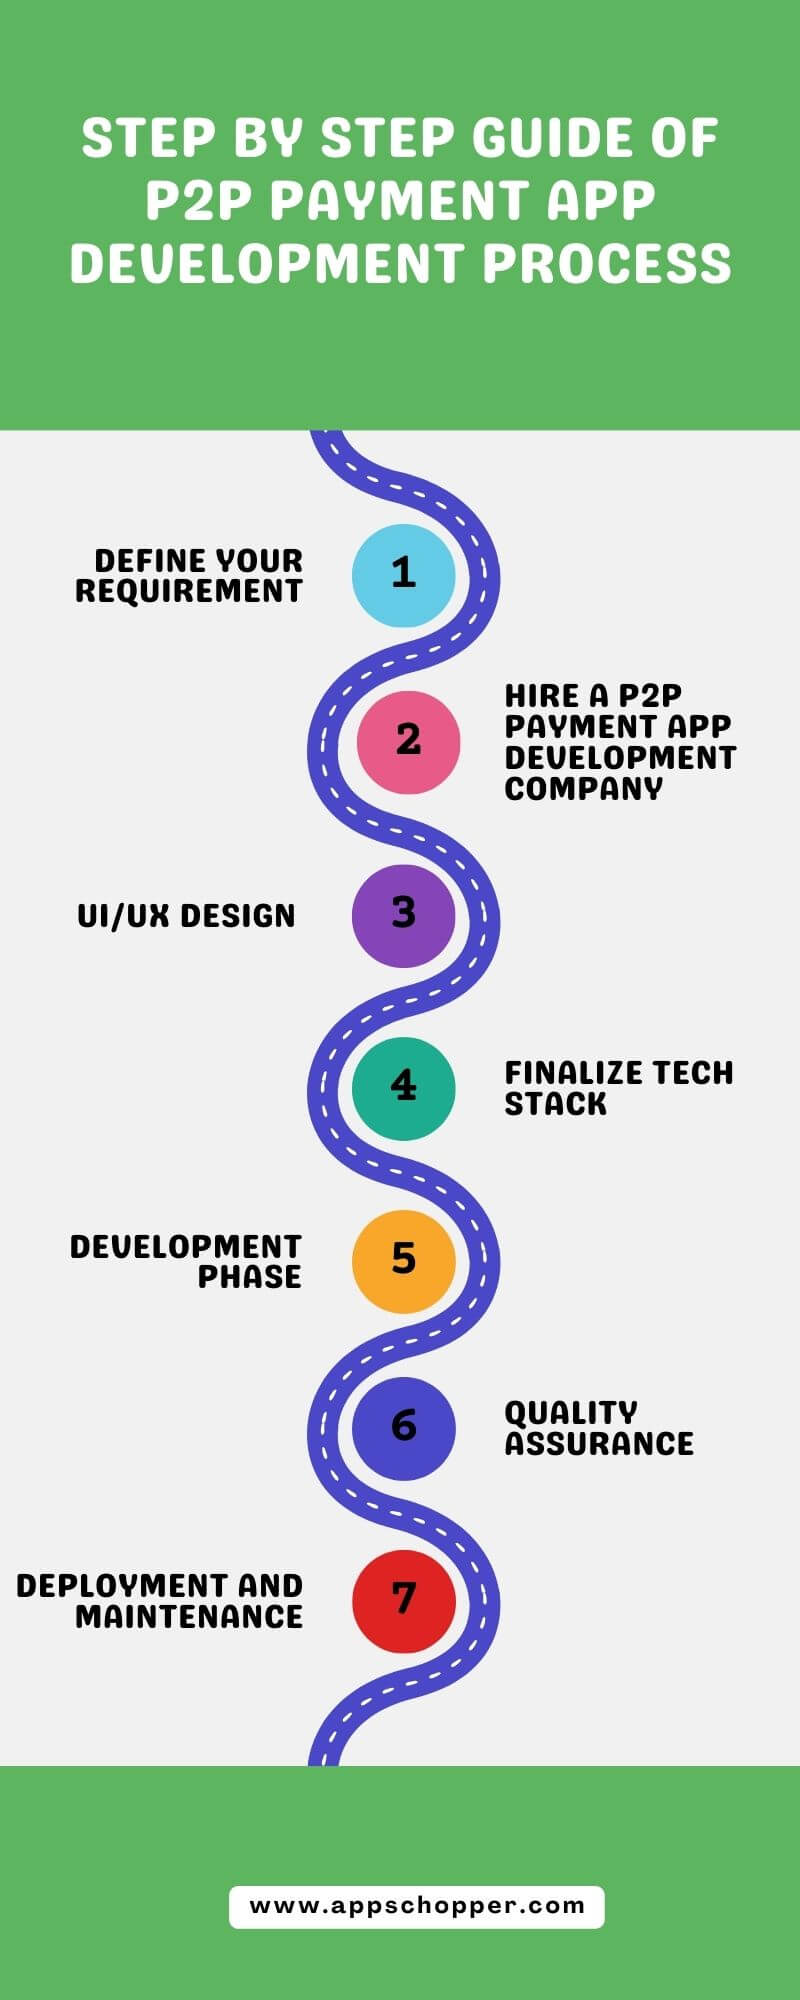  Step By Step Guide of P2P Payment App Development Process